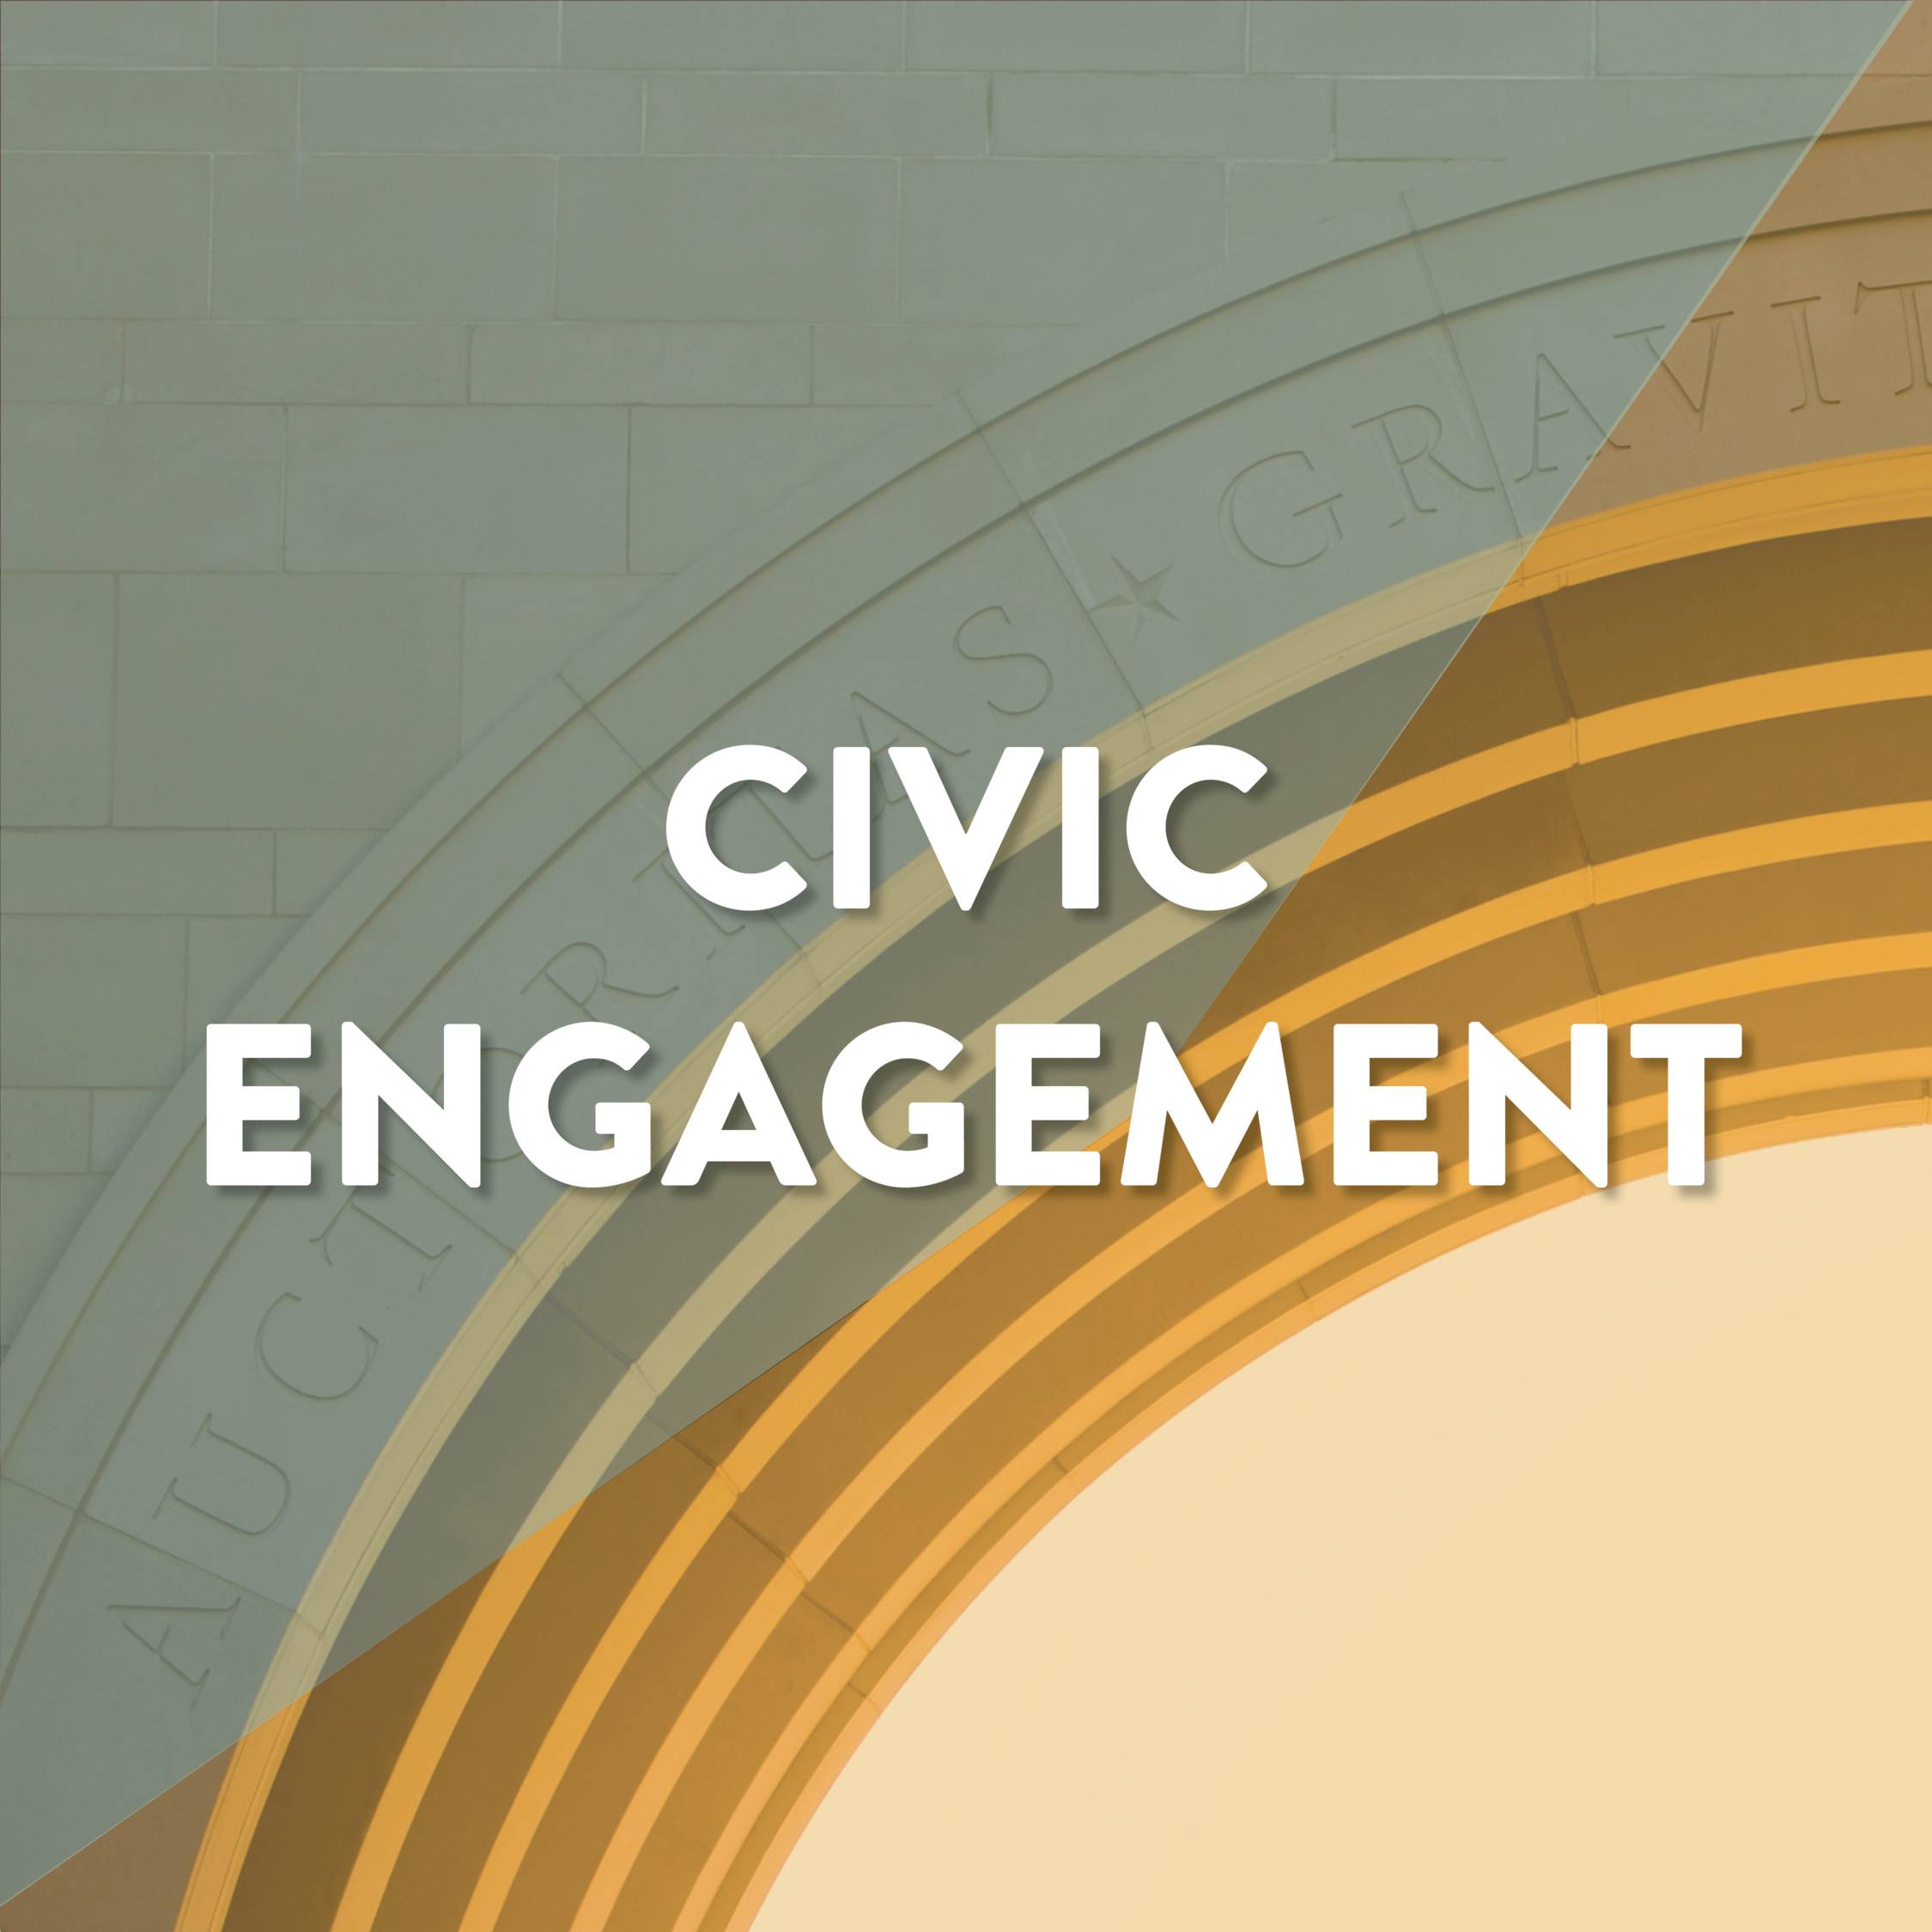 Click here to learn more about the MPA Program's initiative on civic engagement.